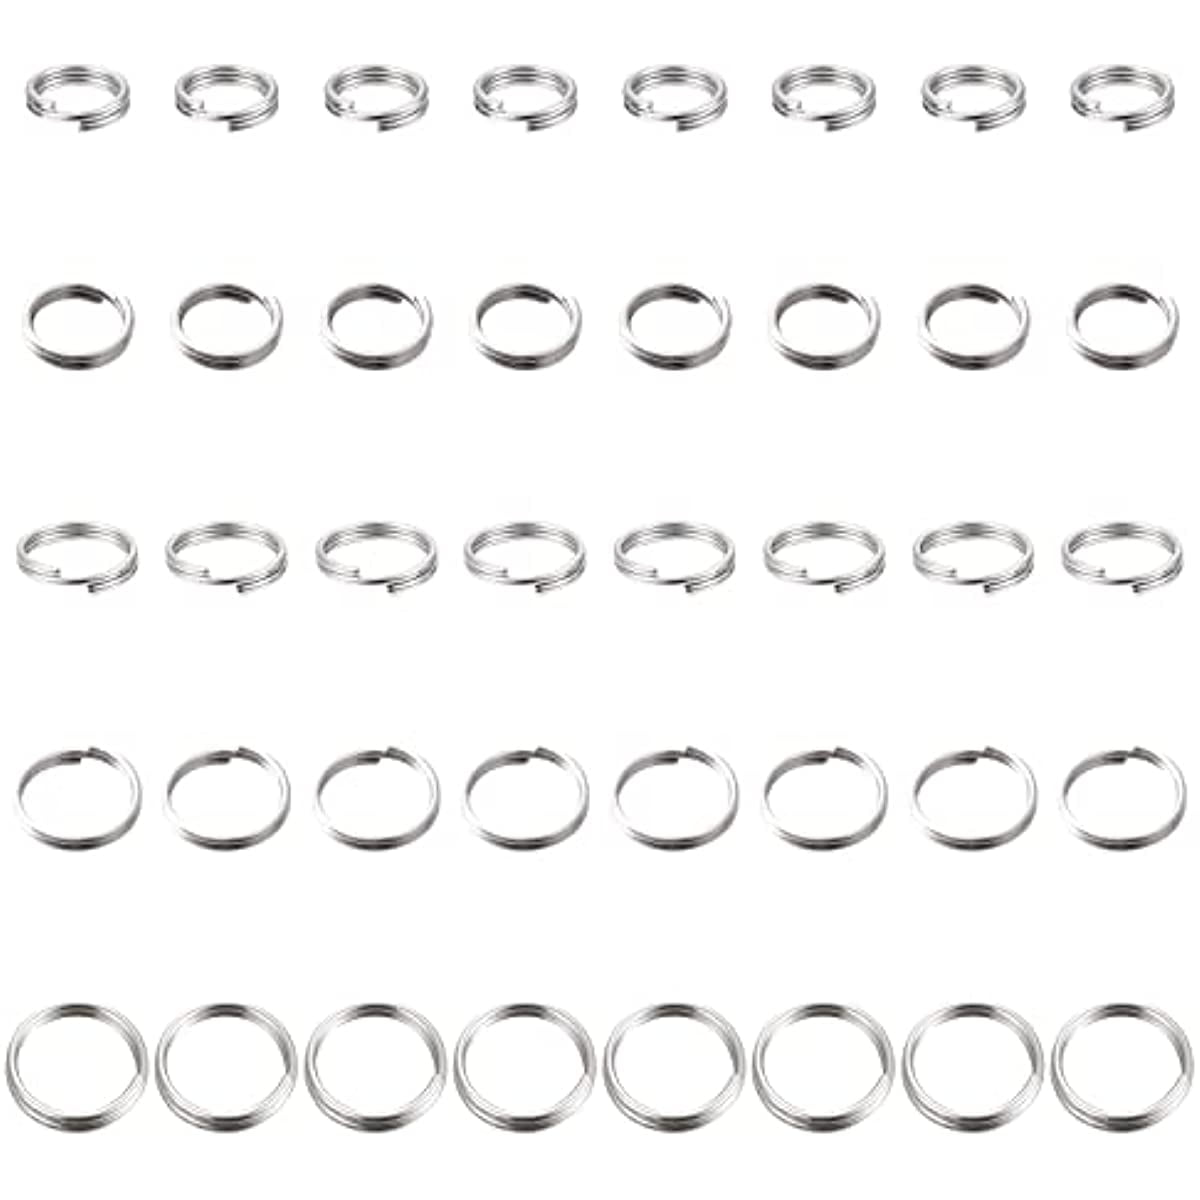  200pcs 12mm Mini Split Jump Ring with Double Loops Small Round  Metal Black Key Rings Connectors for Making Handwork Charms Pendants Key  Chains Ornaments DIY Crafts Accessories